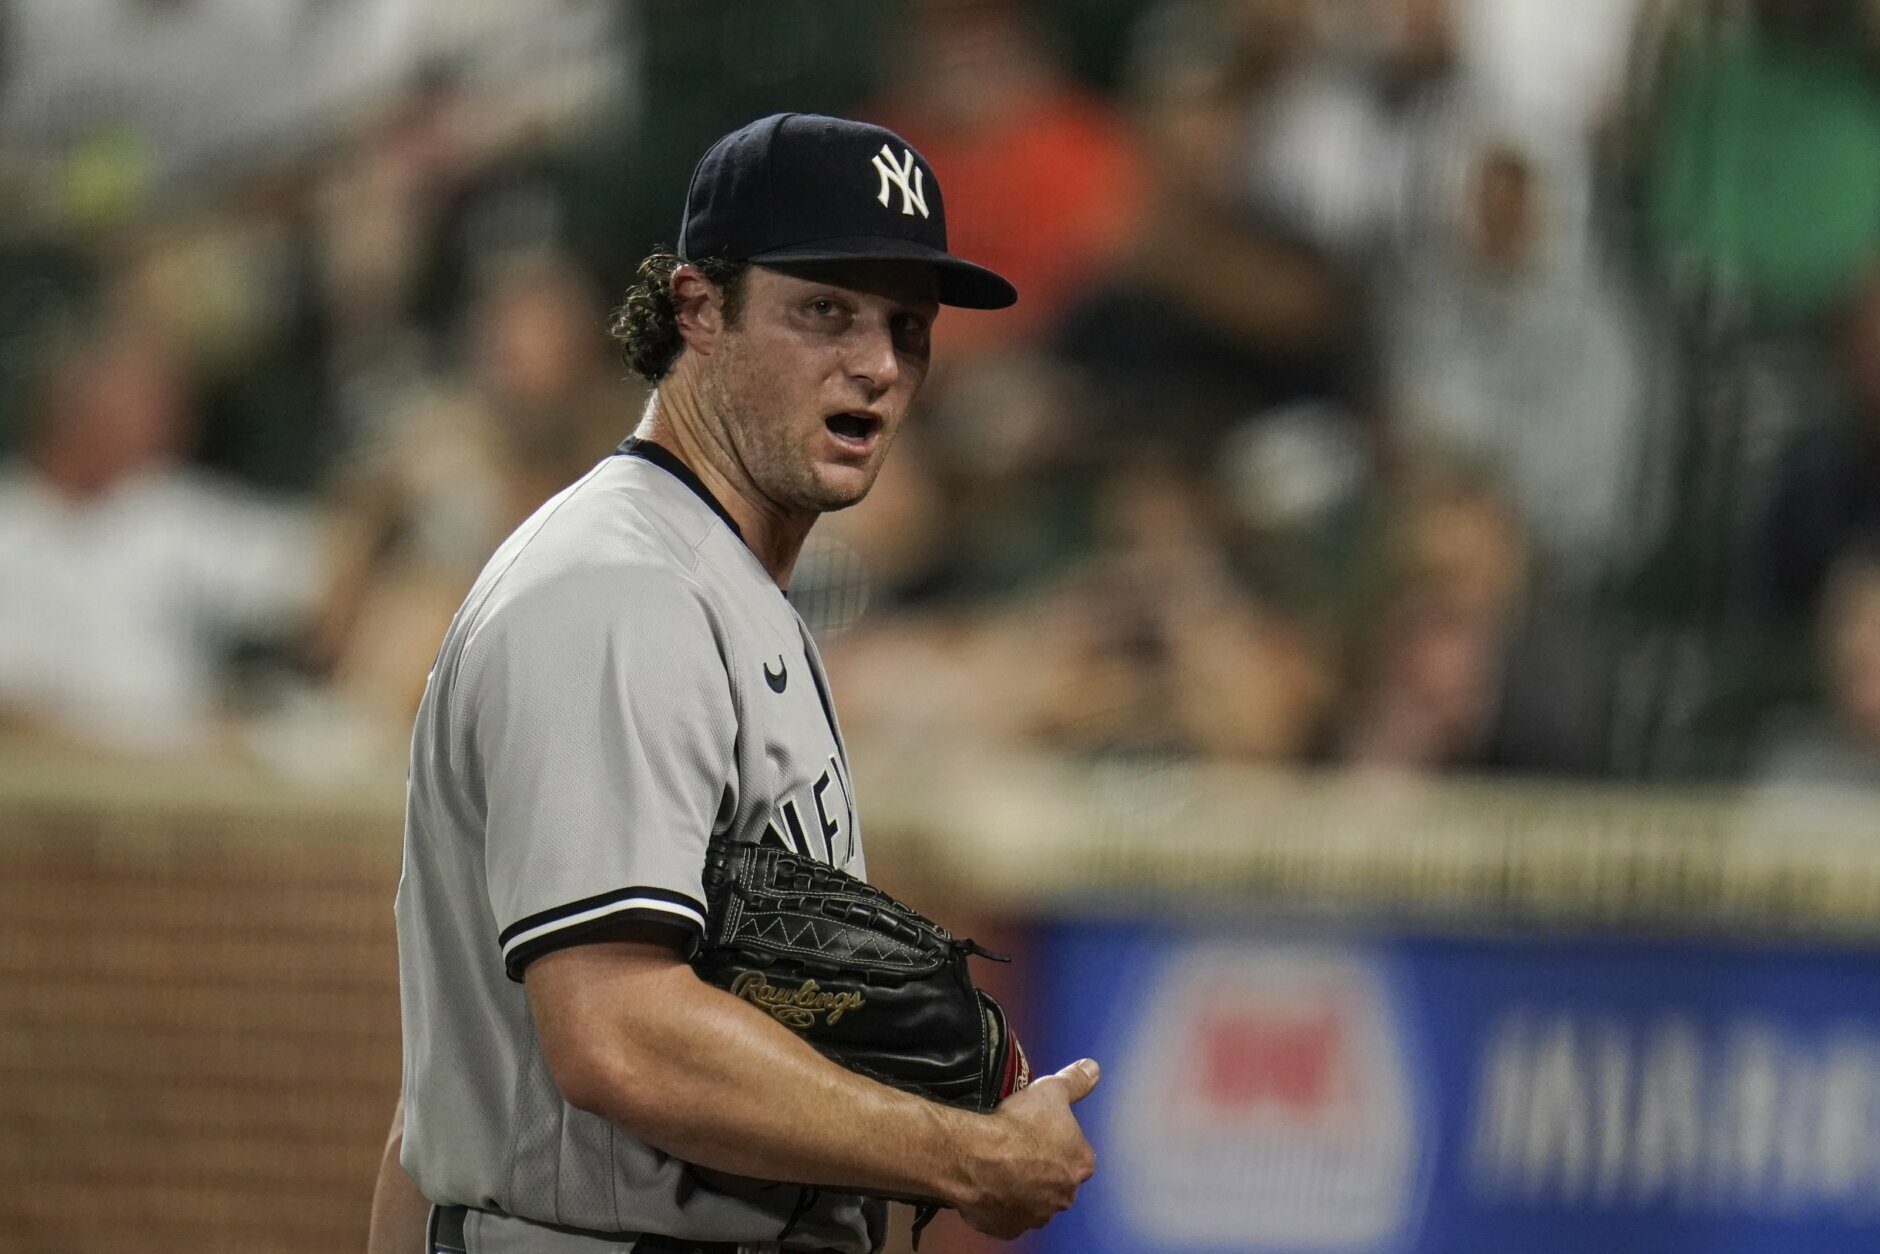 Gerrit Cole Becomes the Latest Victim of the New York Yankees